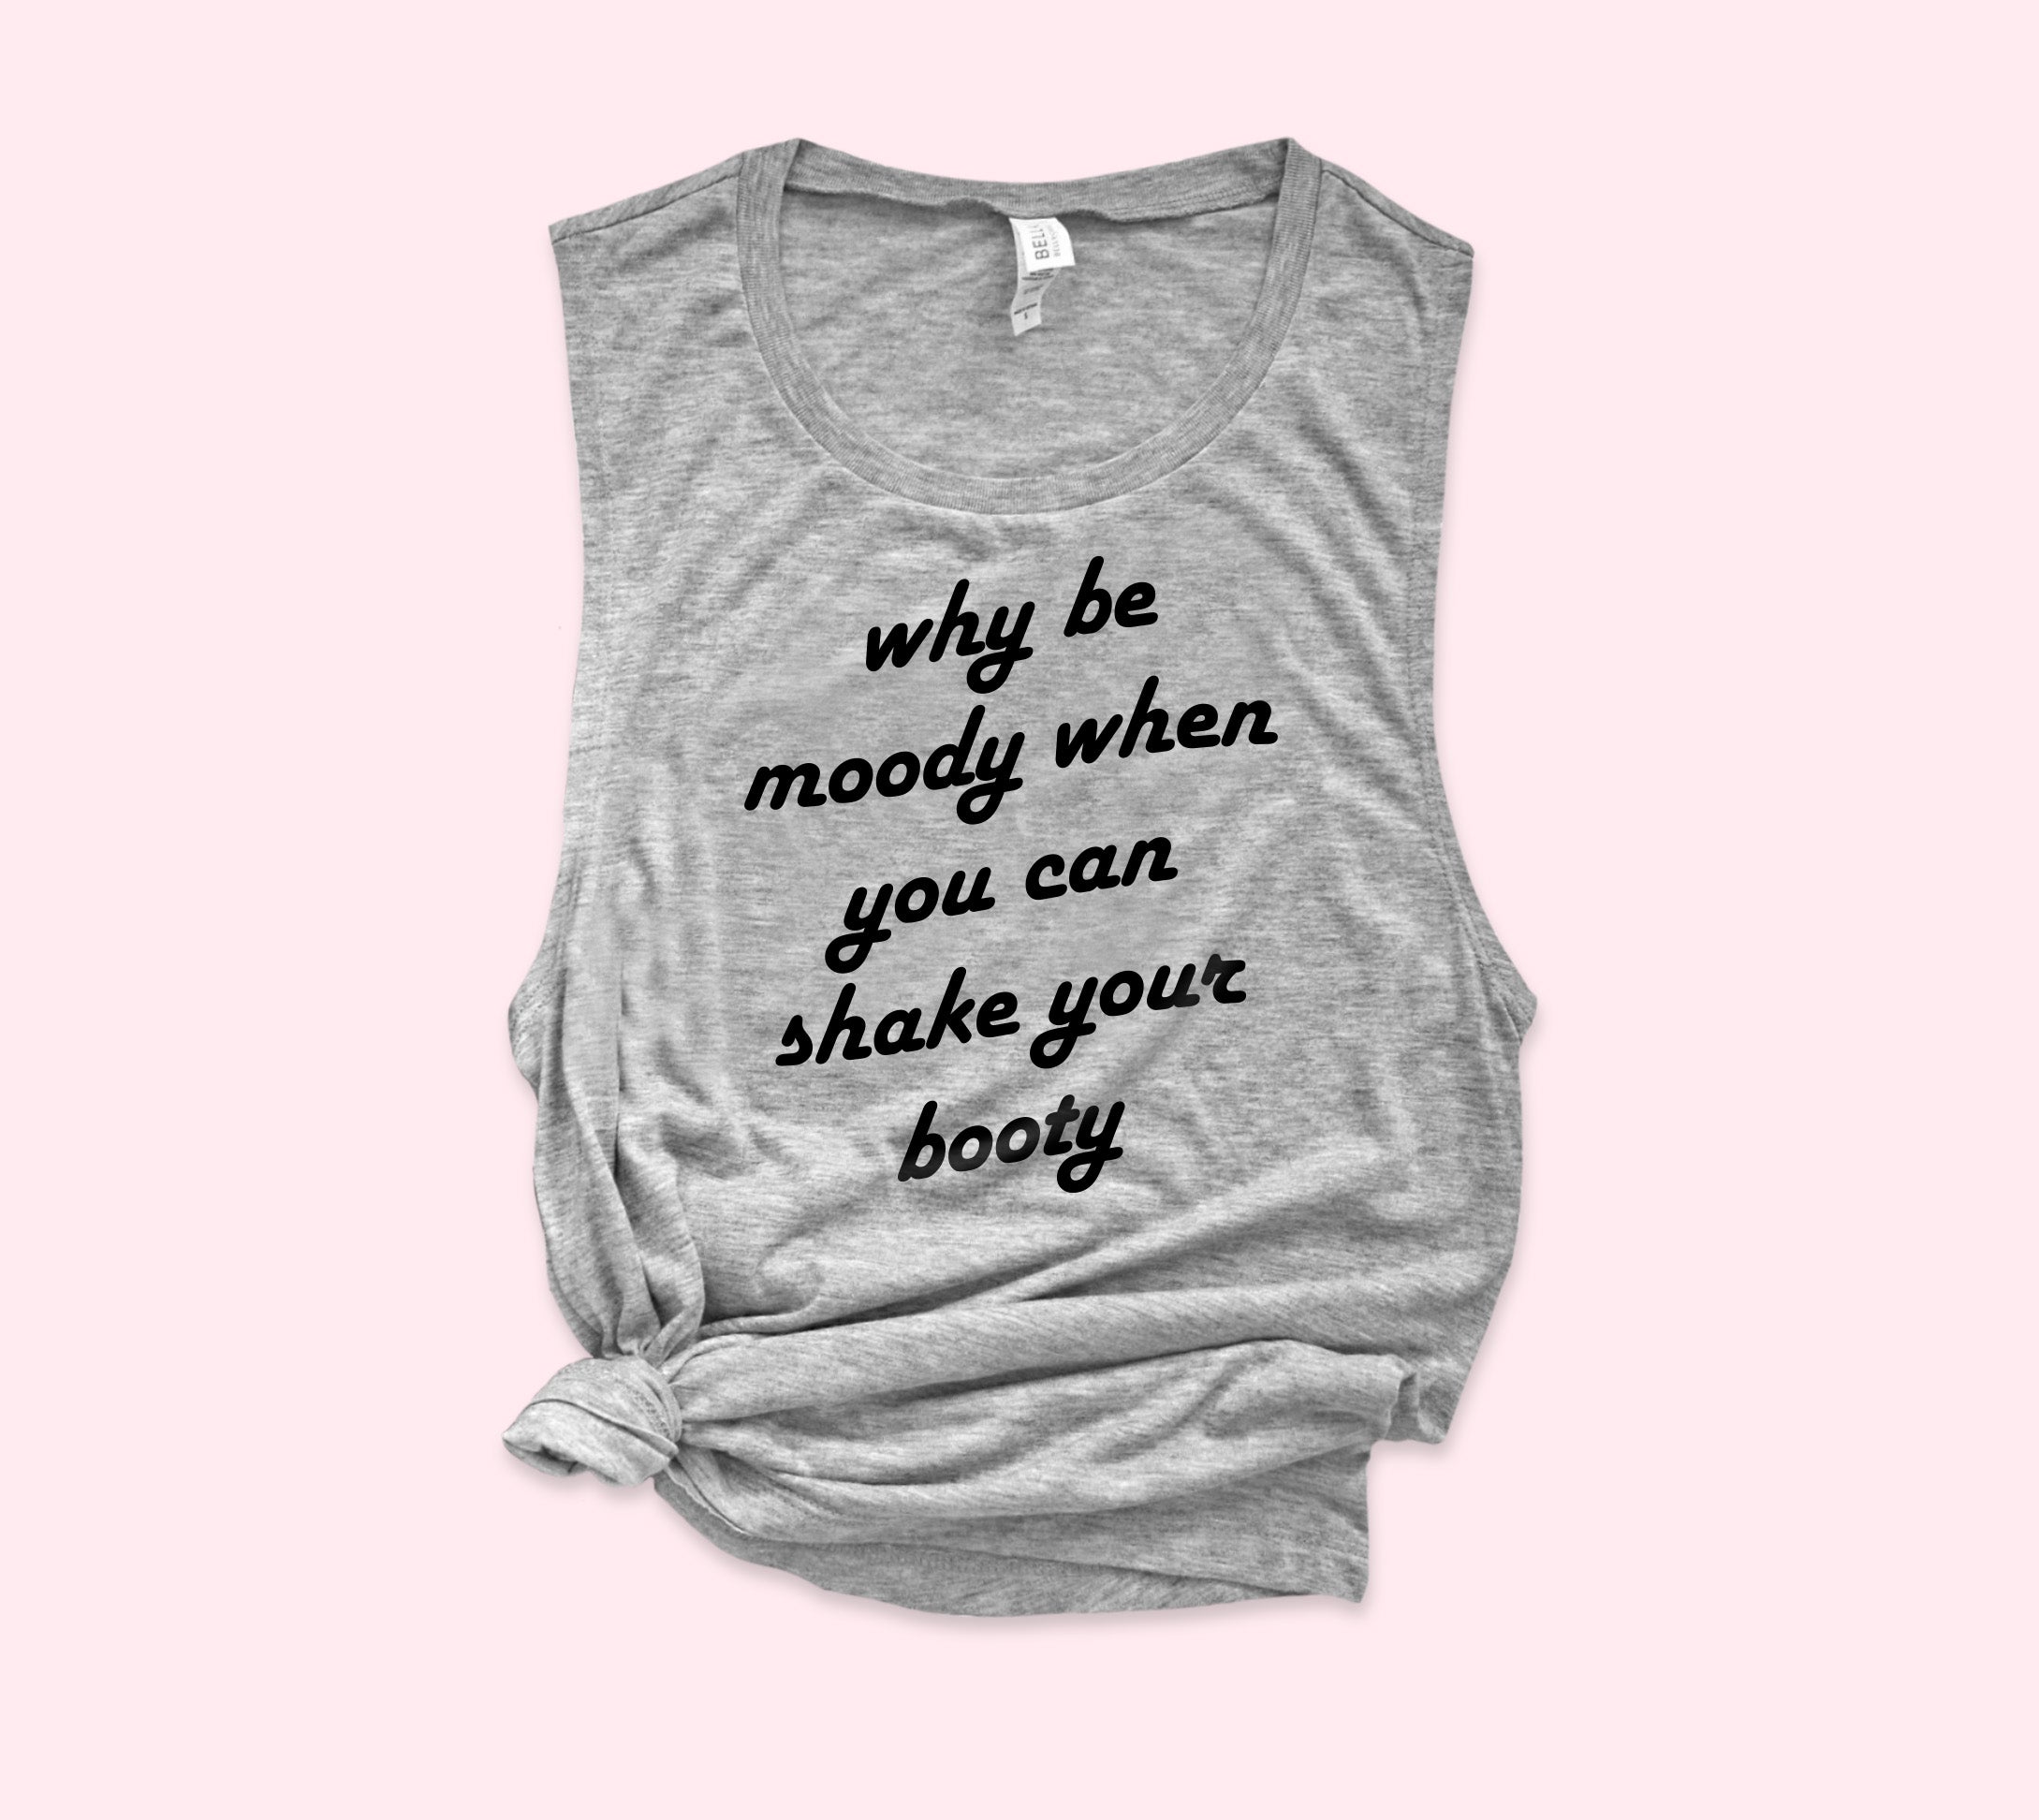 Shake Your Booty Muscle Tank